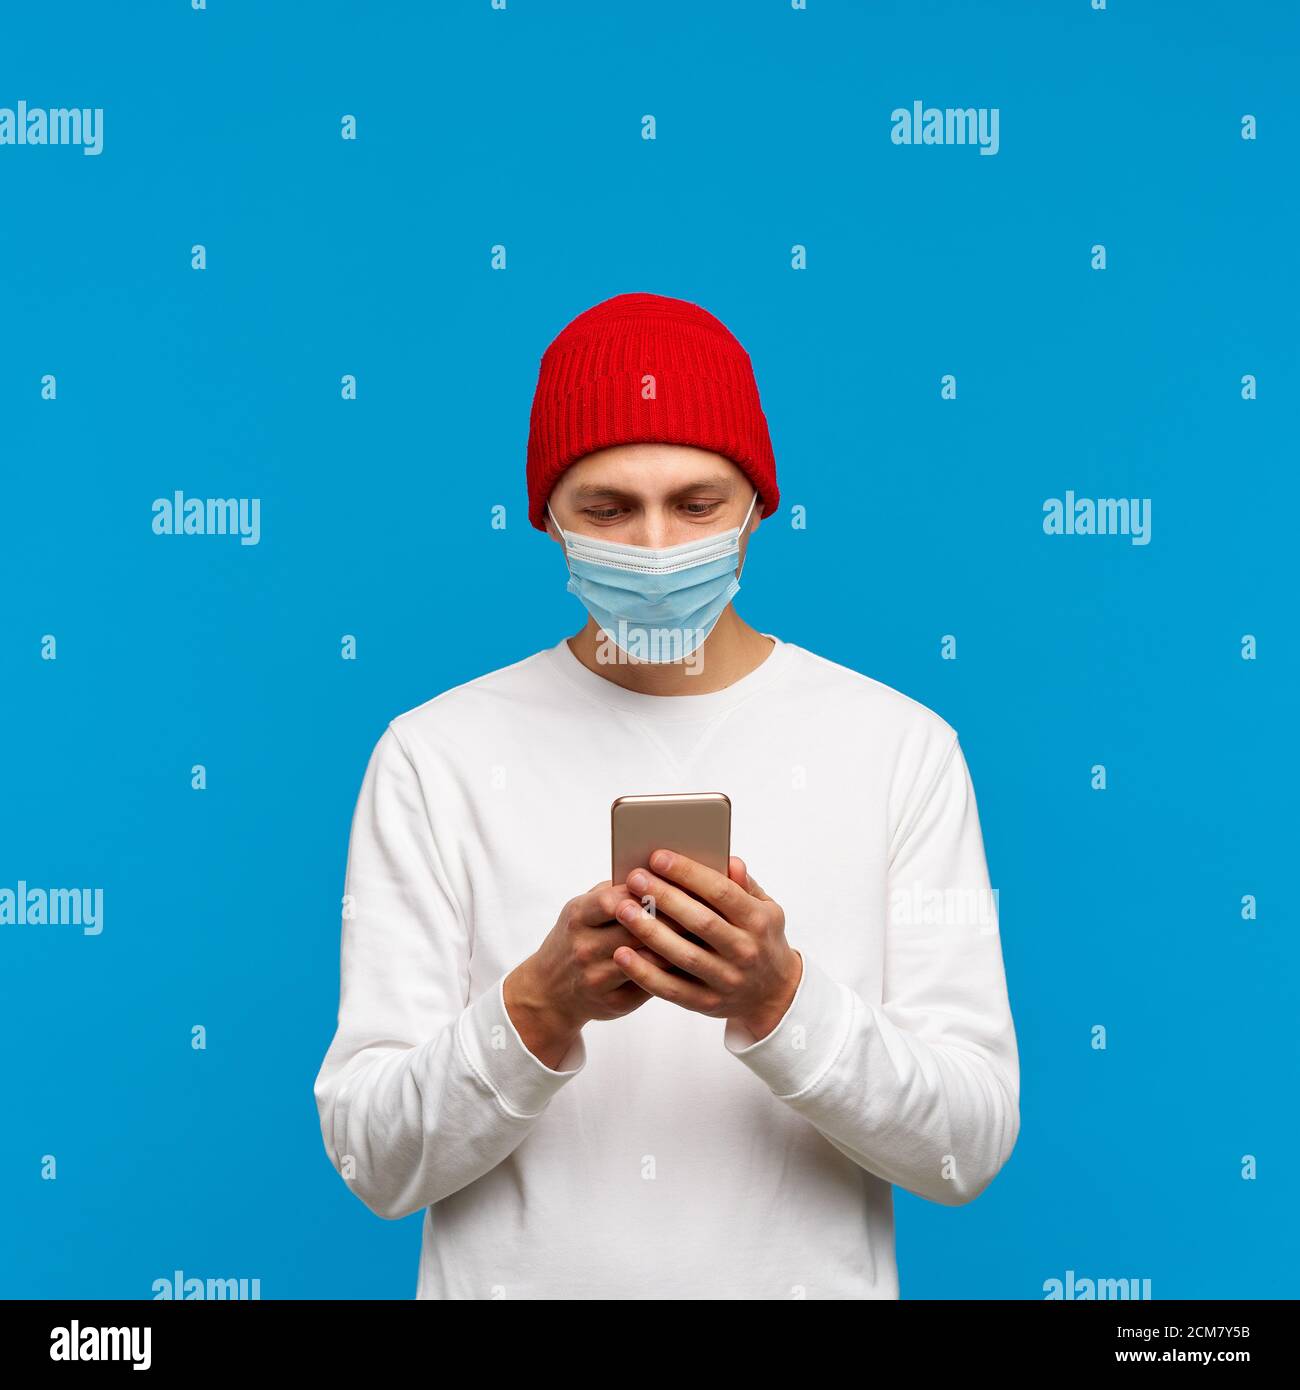 Portrait of man with medical protective face mask, texting on mobile phone. Male write message isolated on bright blue colored background. White jumper and red hat. Stock Photo